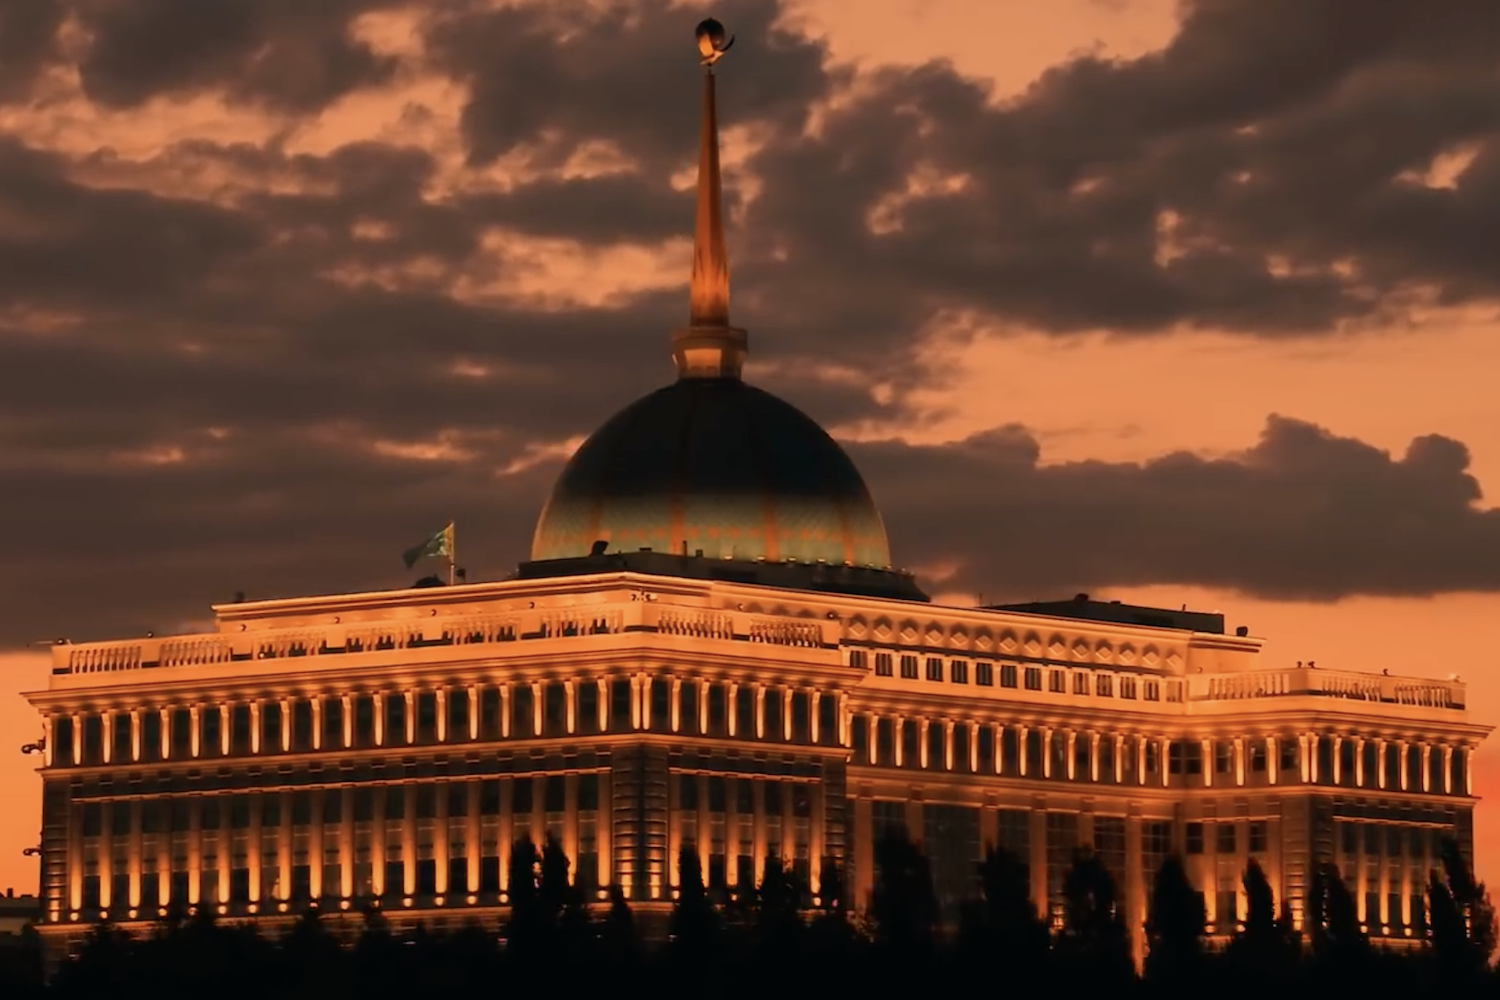 Kazakhstan's presidential palace at sunset, from Qazaq: History of the Golden Man (2021)